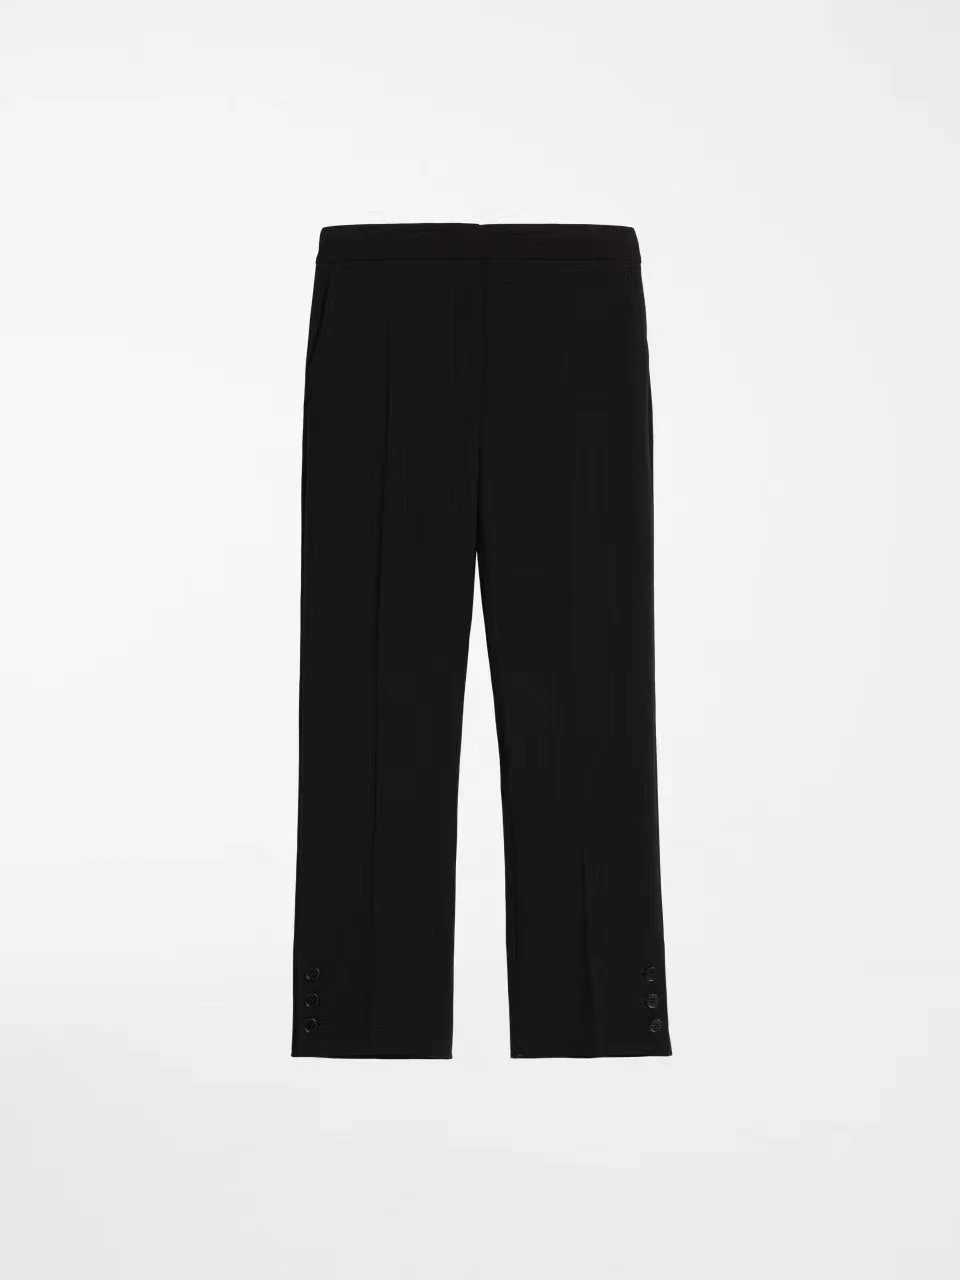 

Fenggejiwo wool pants have straight legs with a slight crease, and shell buttons at the legs for a super slim look. The color of